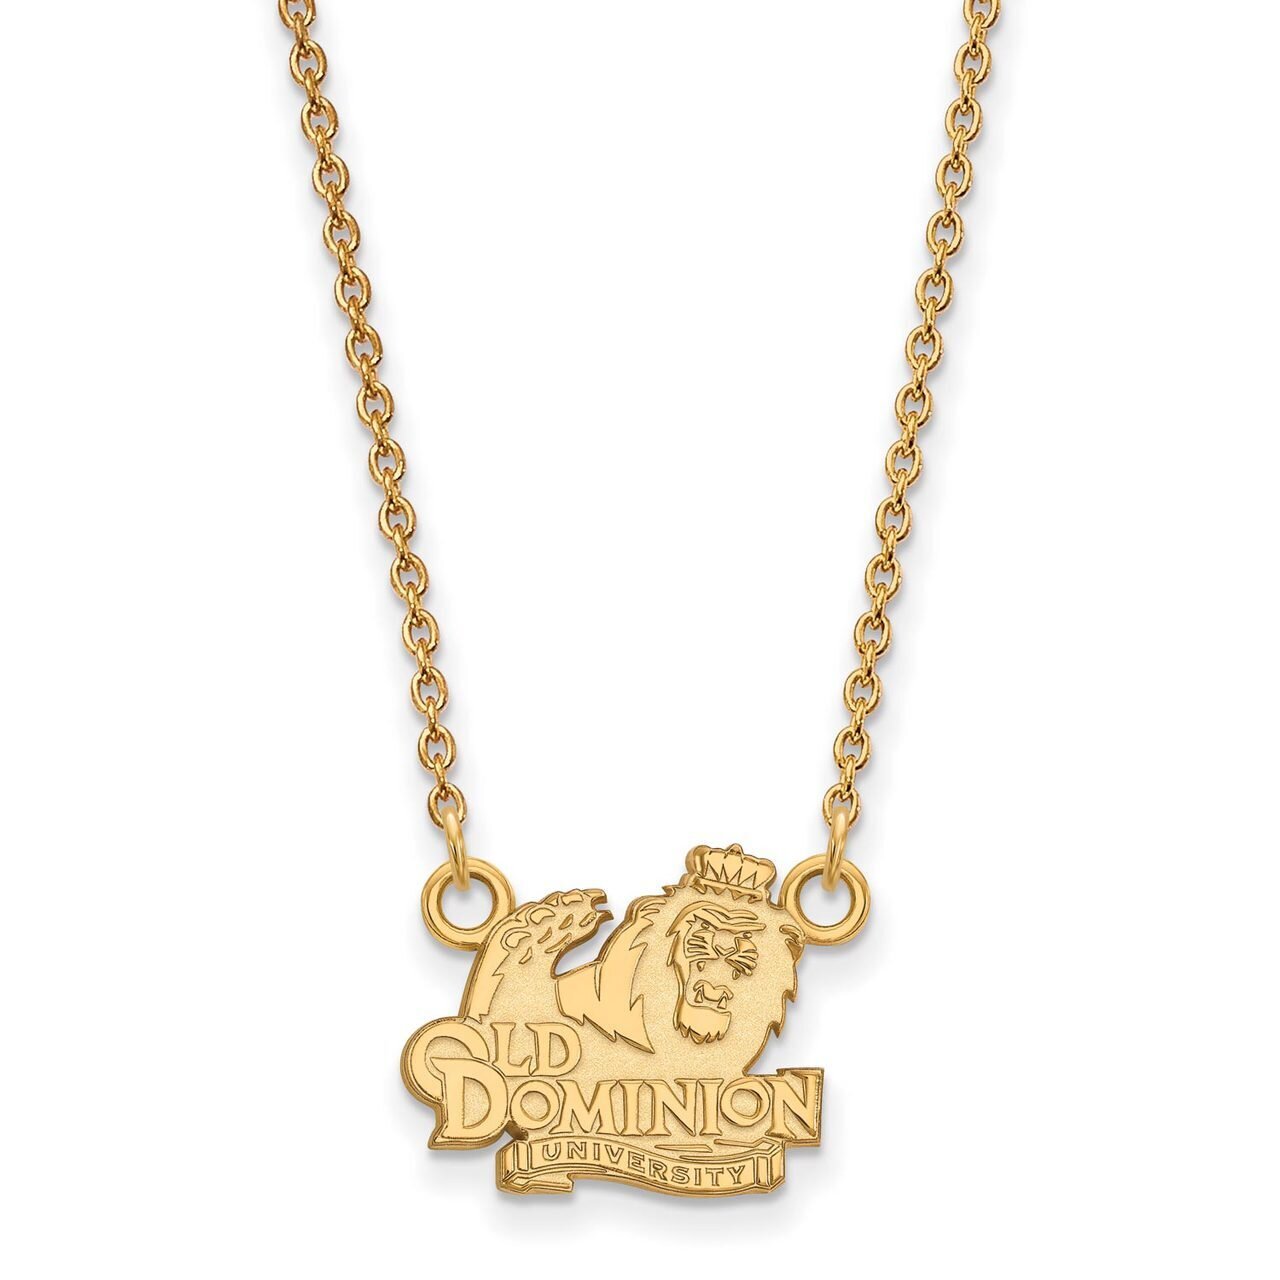 Old Dominion University Small Pendant with Chain Necklace 10k Yellow Gold 1Y011ODU-18